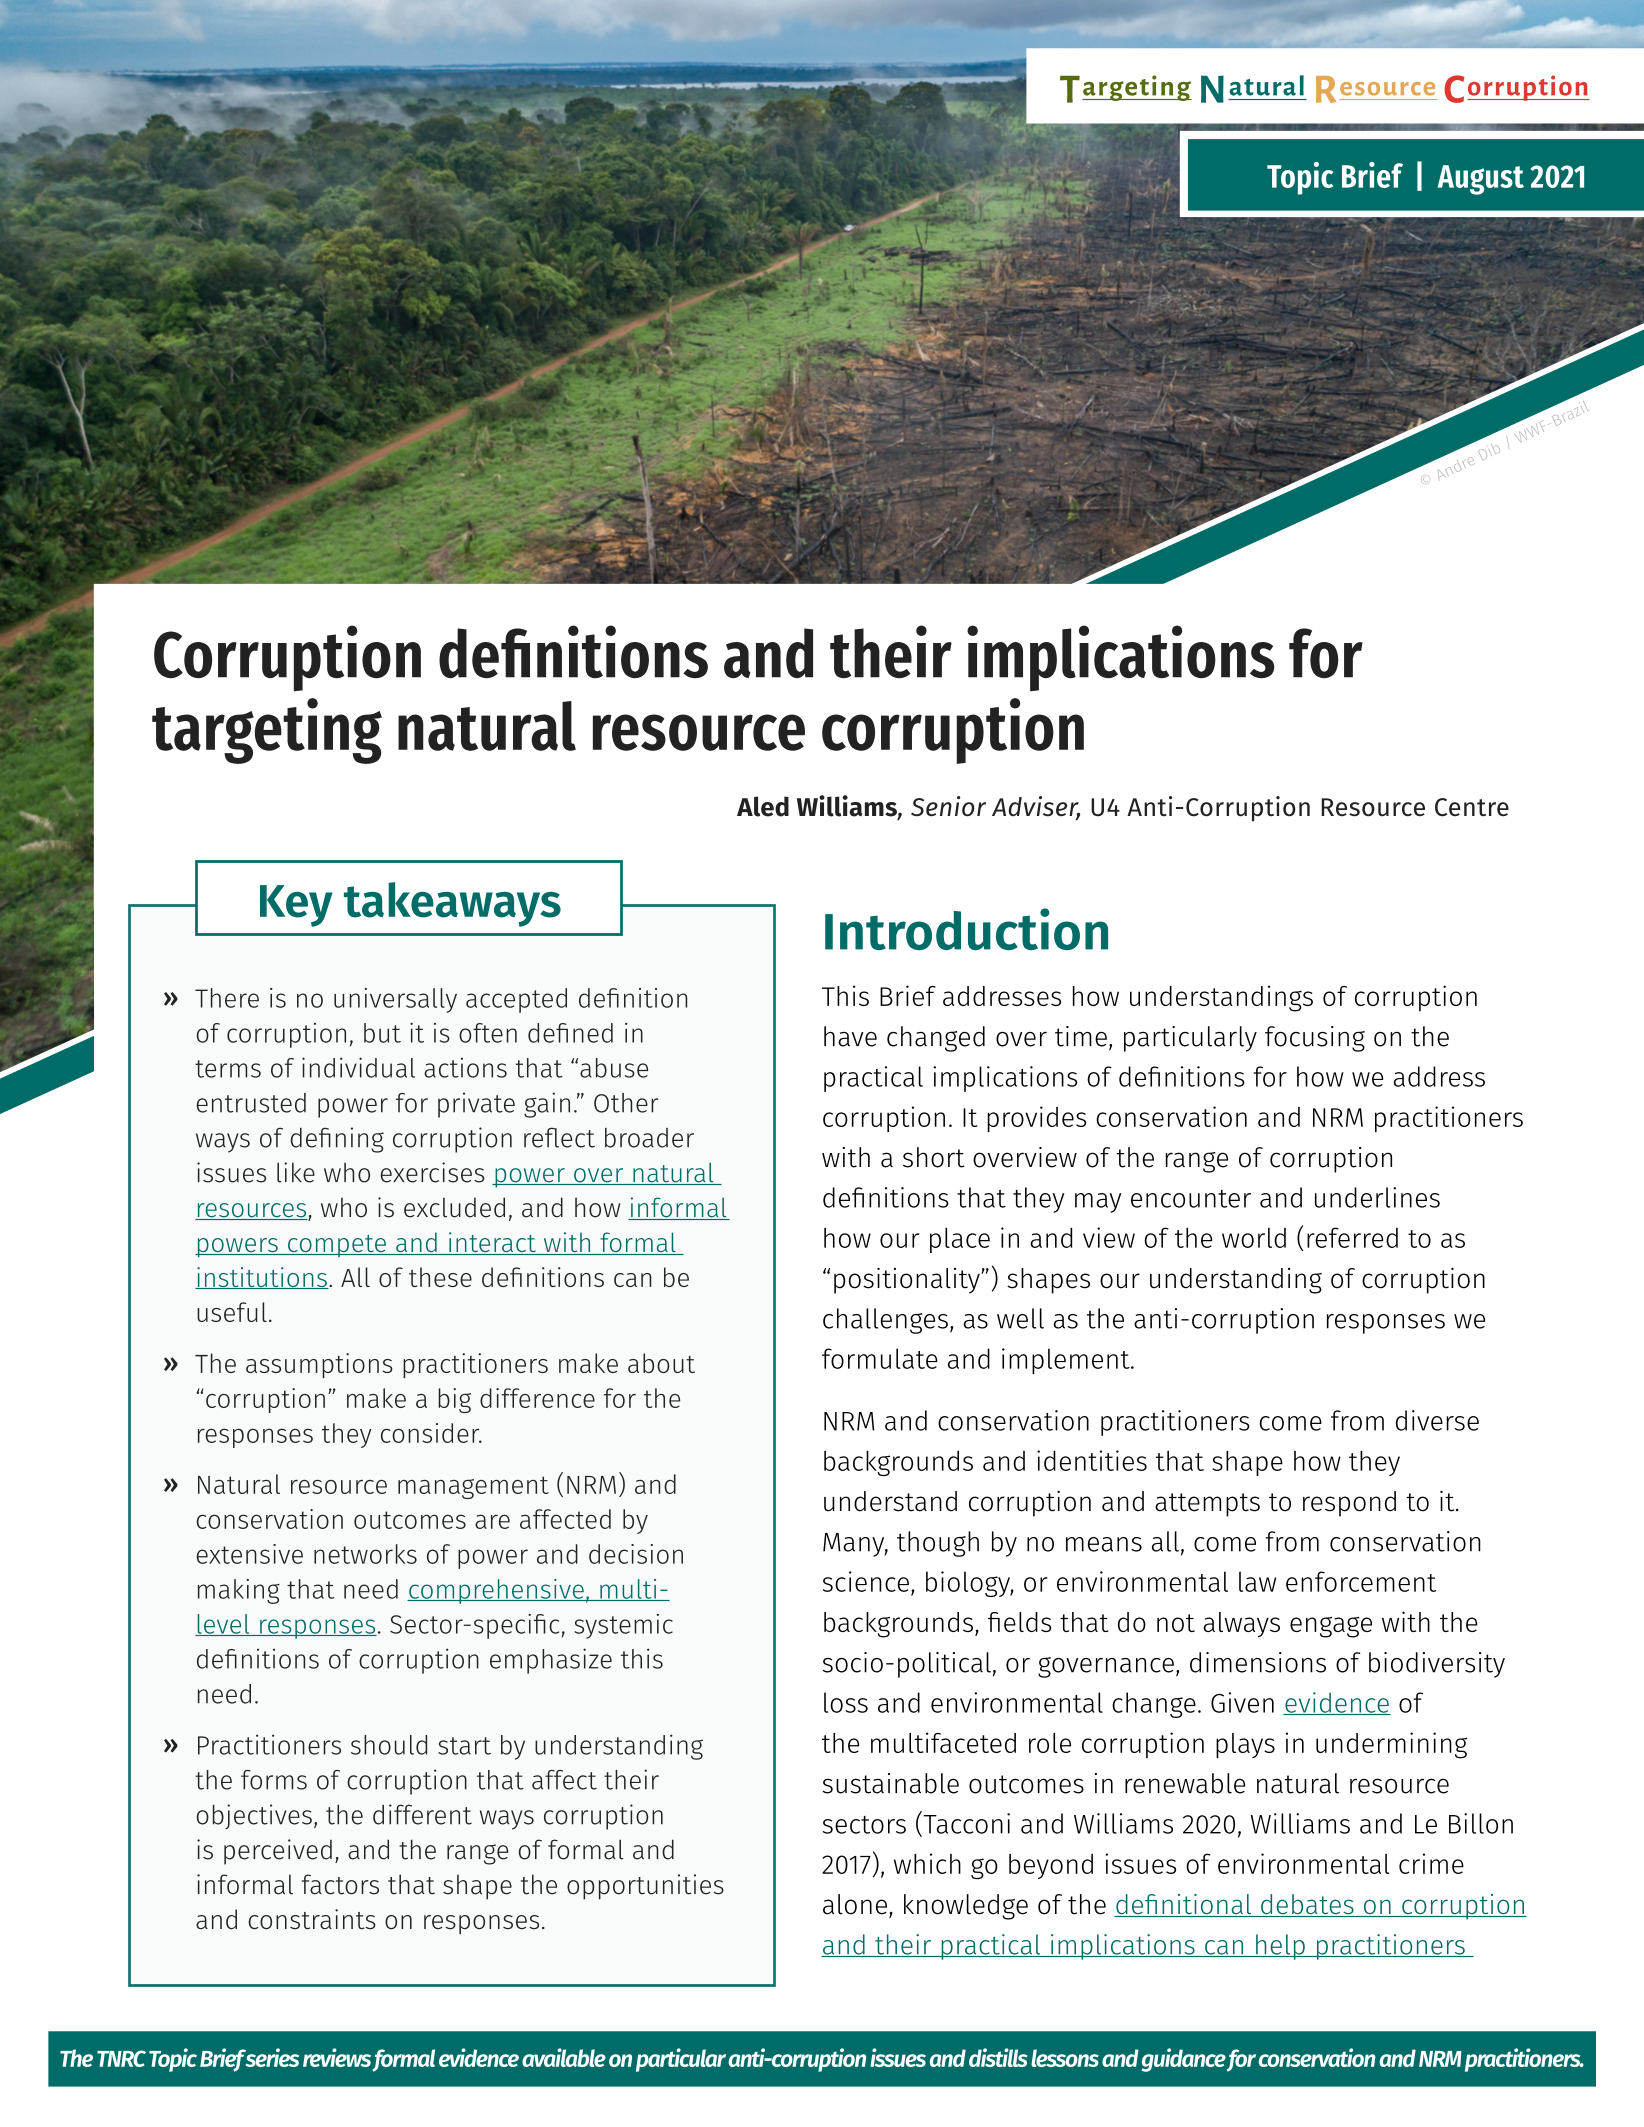 Corruption definitions and their implications for targeting natural resource corruption